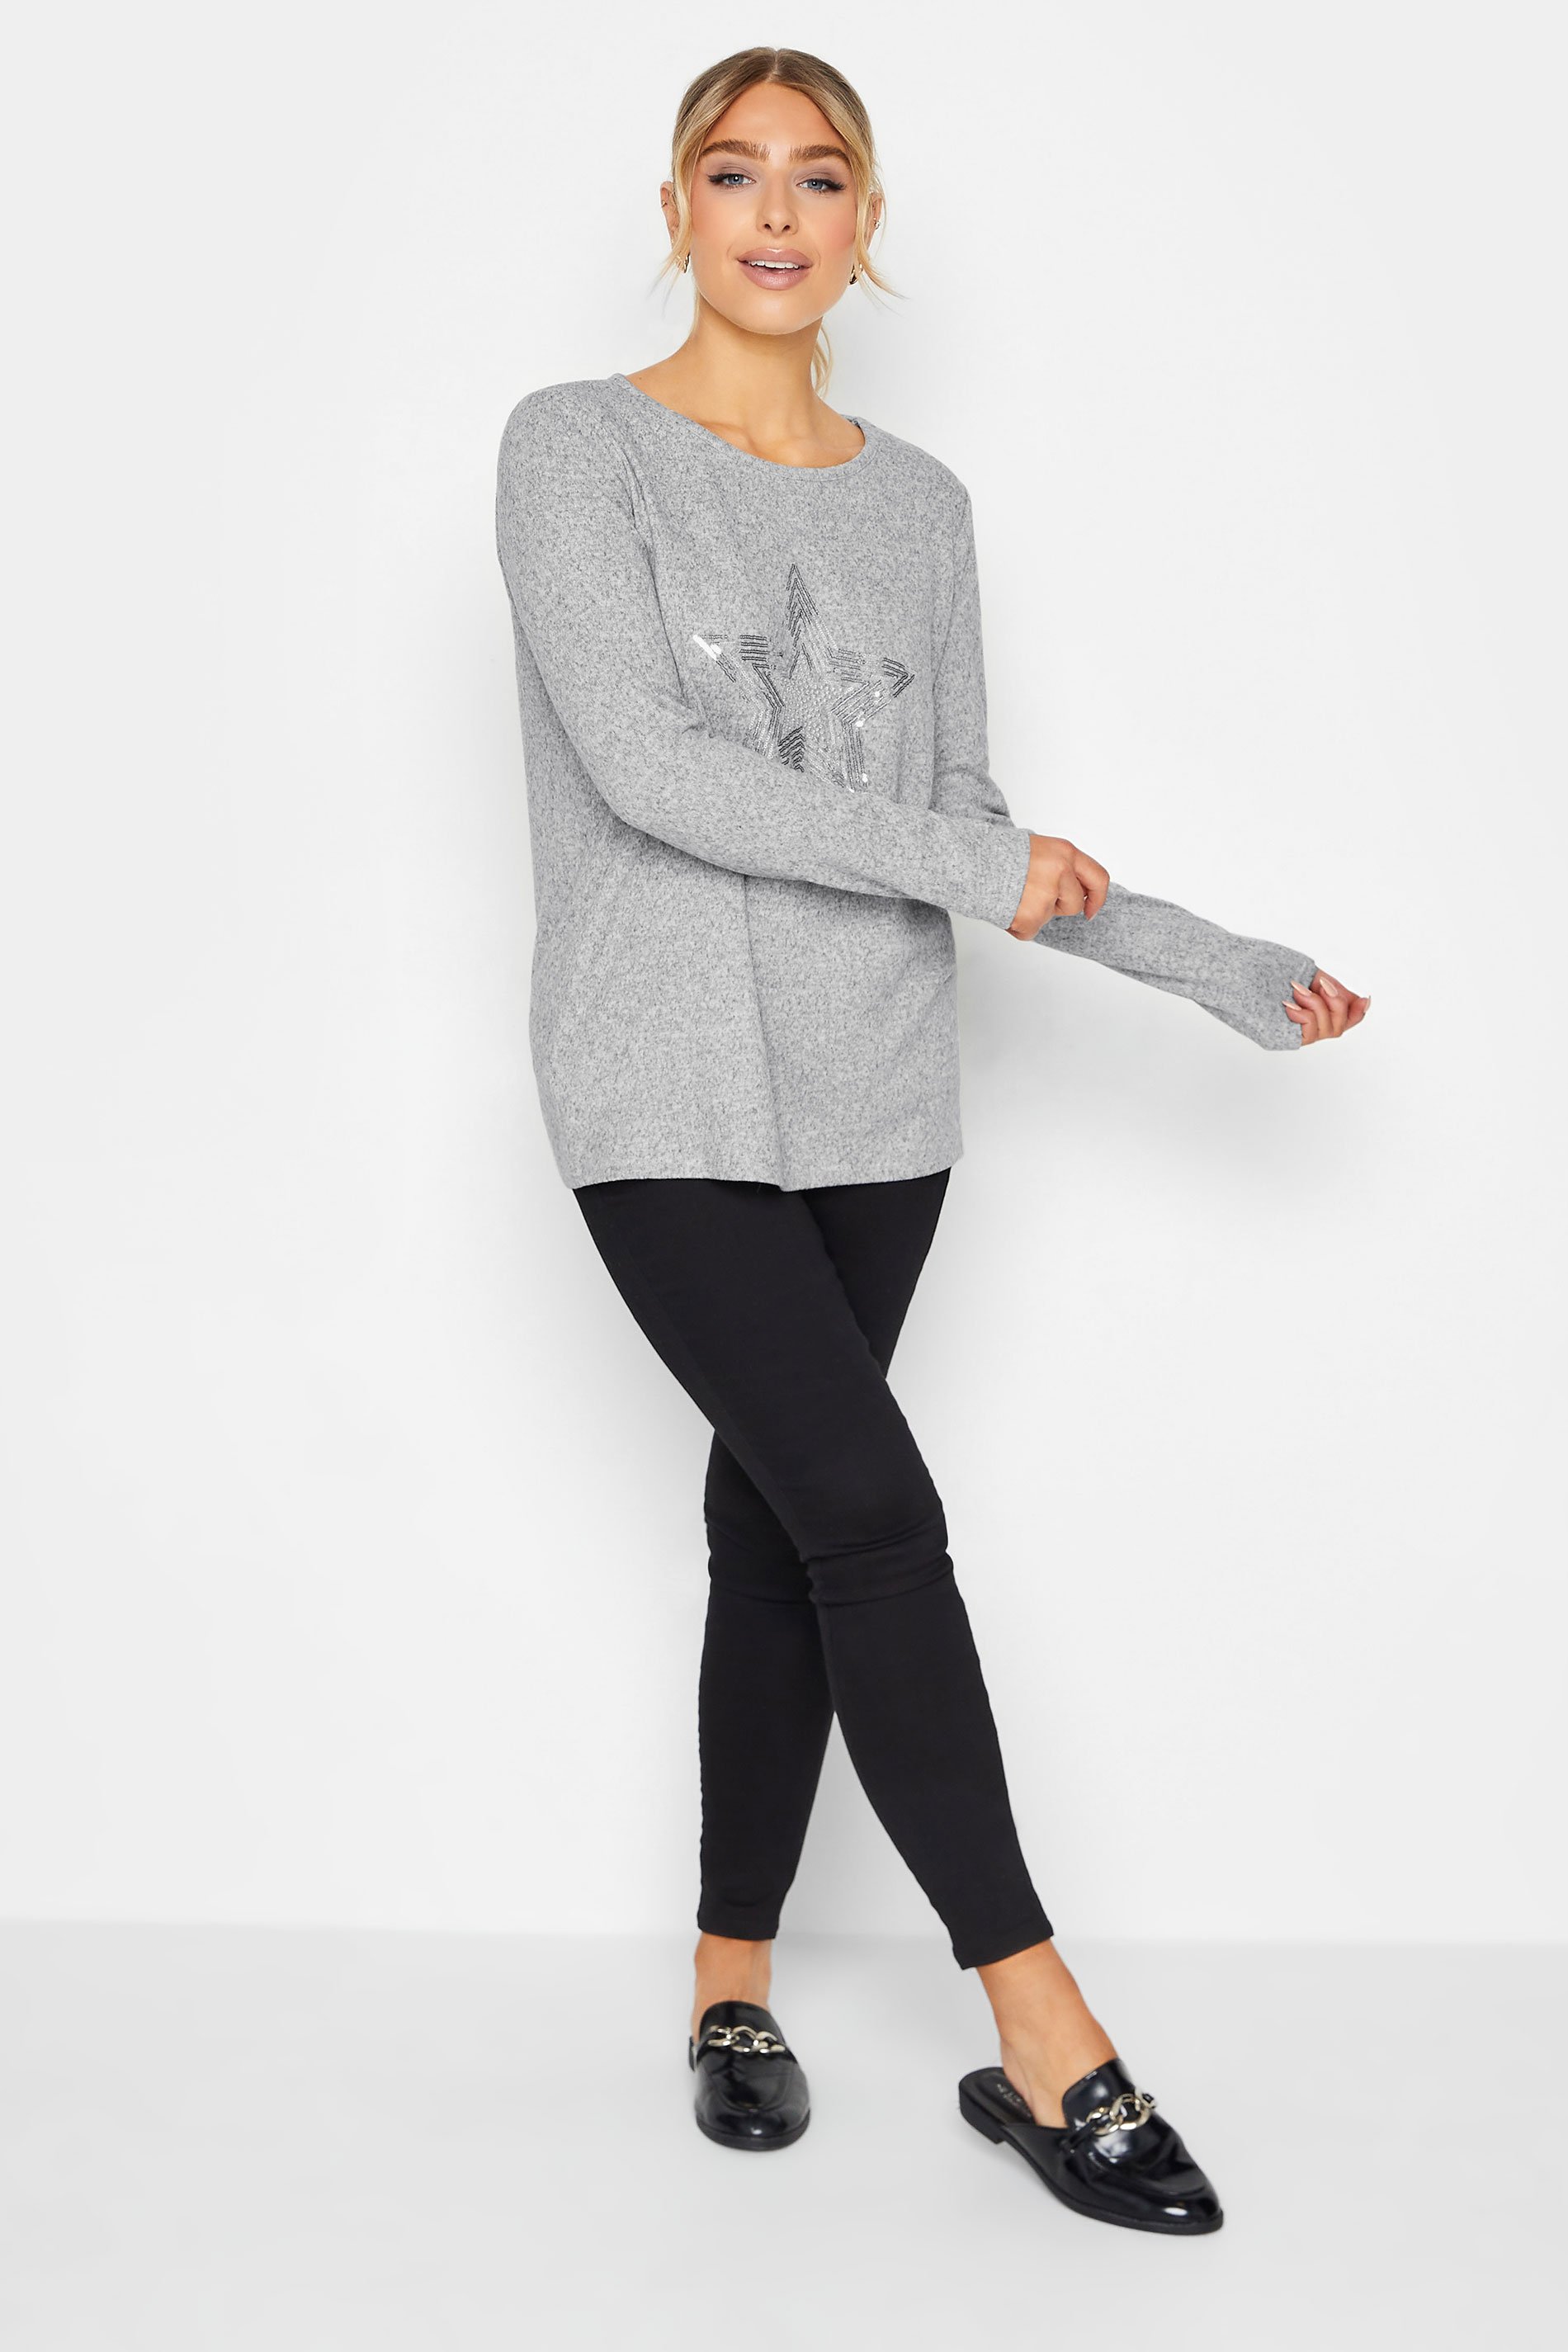 M&Co Grey Sequin Star Soft Touch Jumper | M&Co